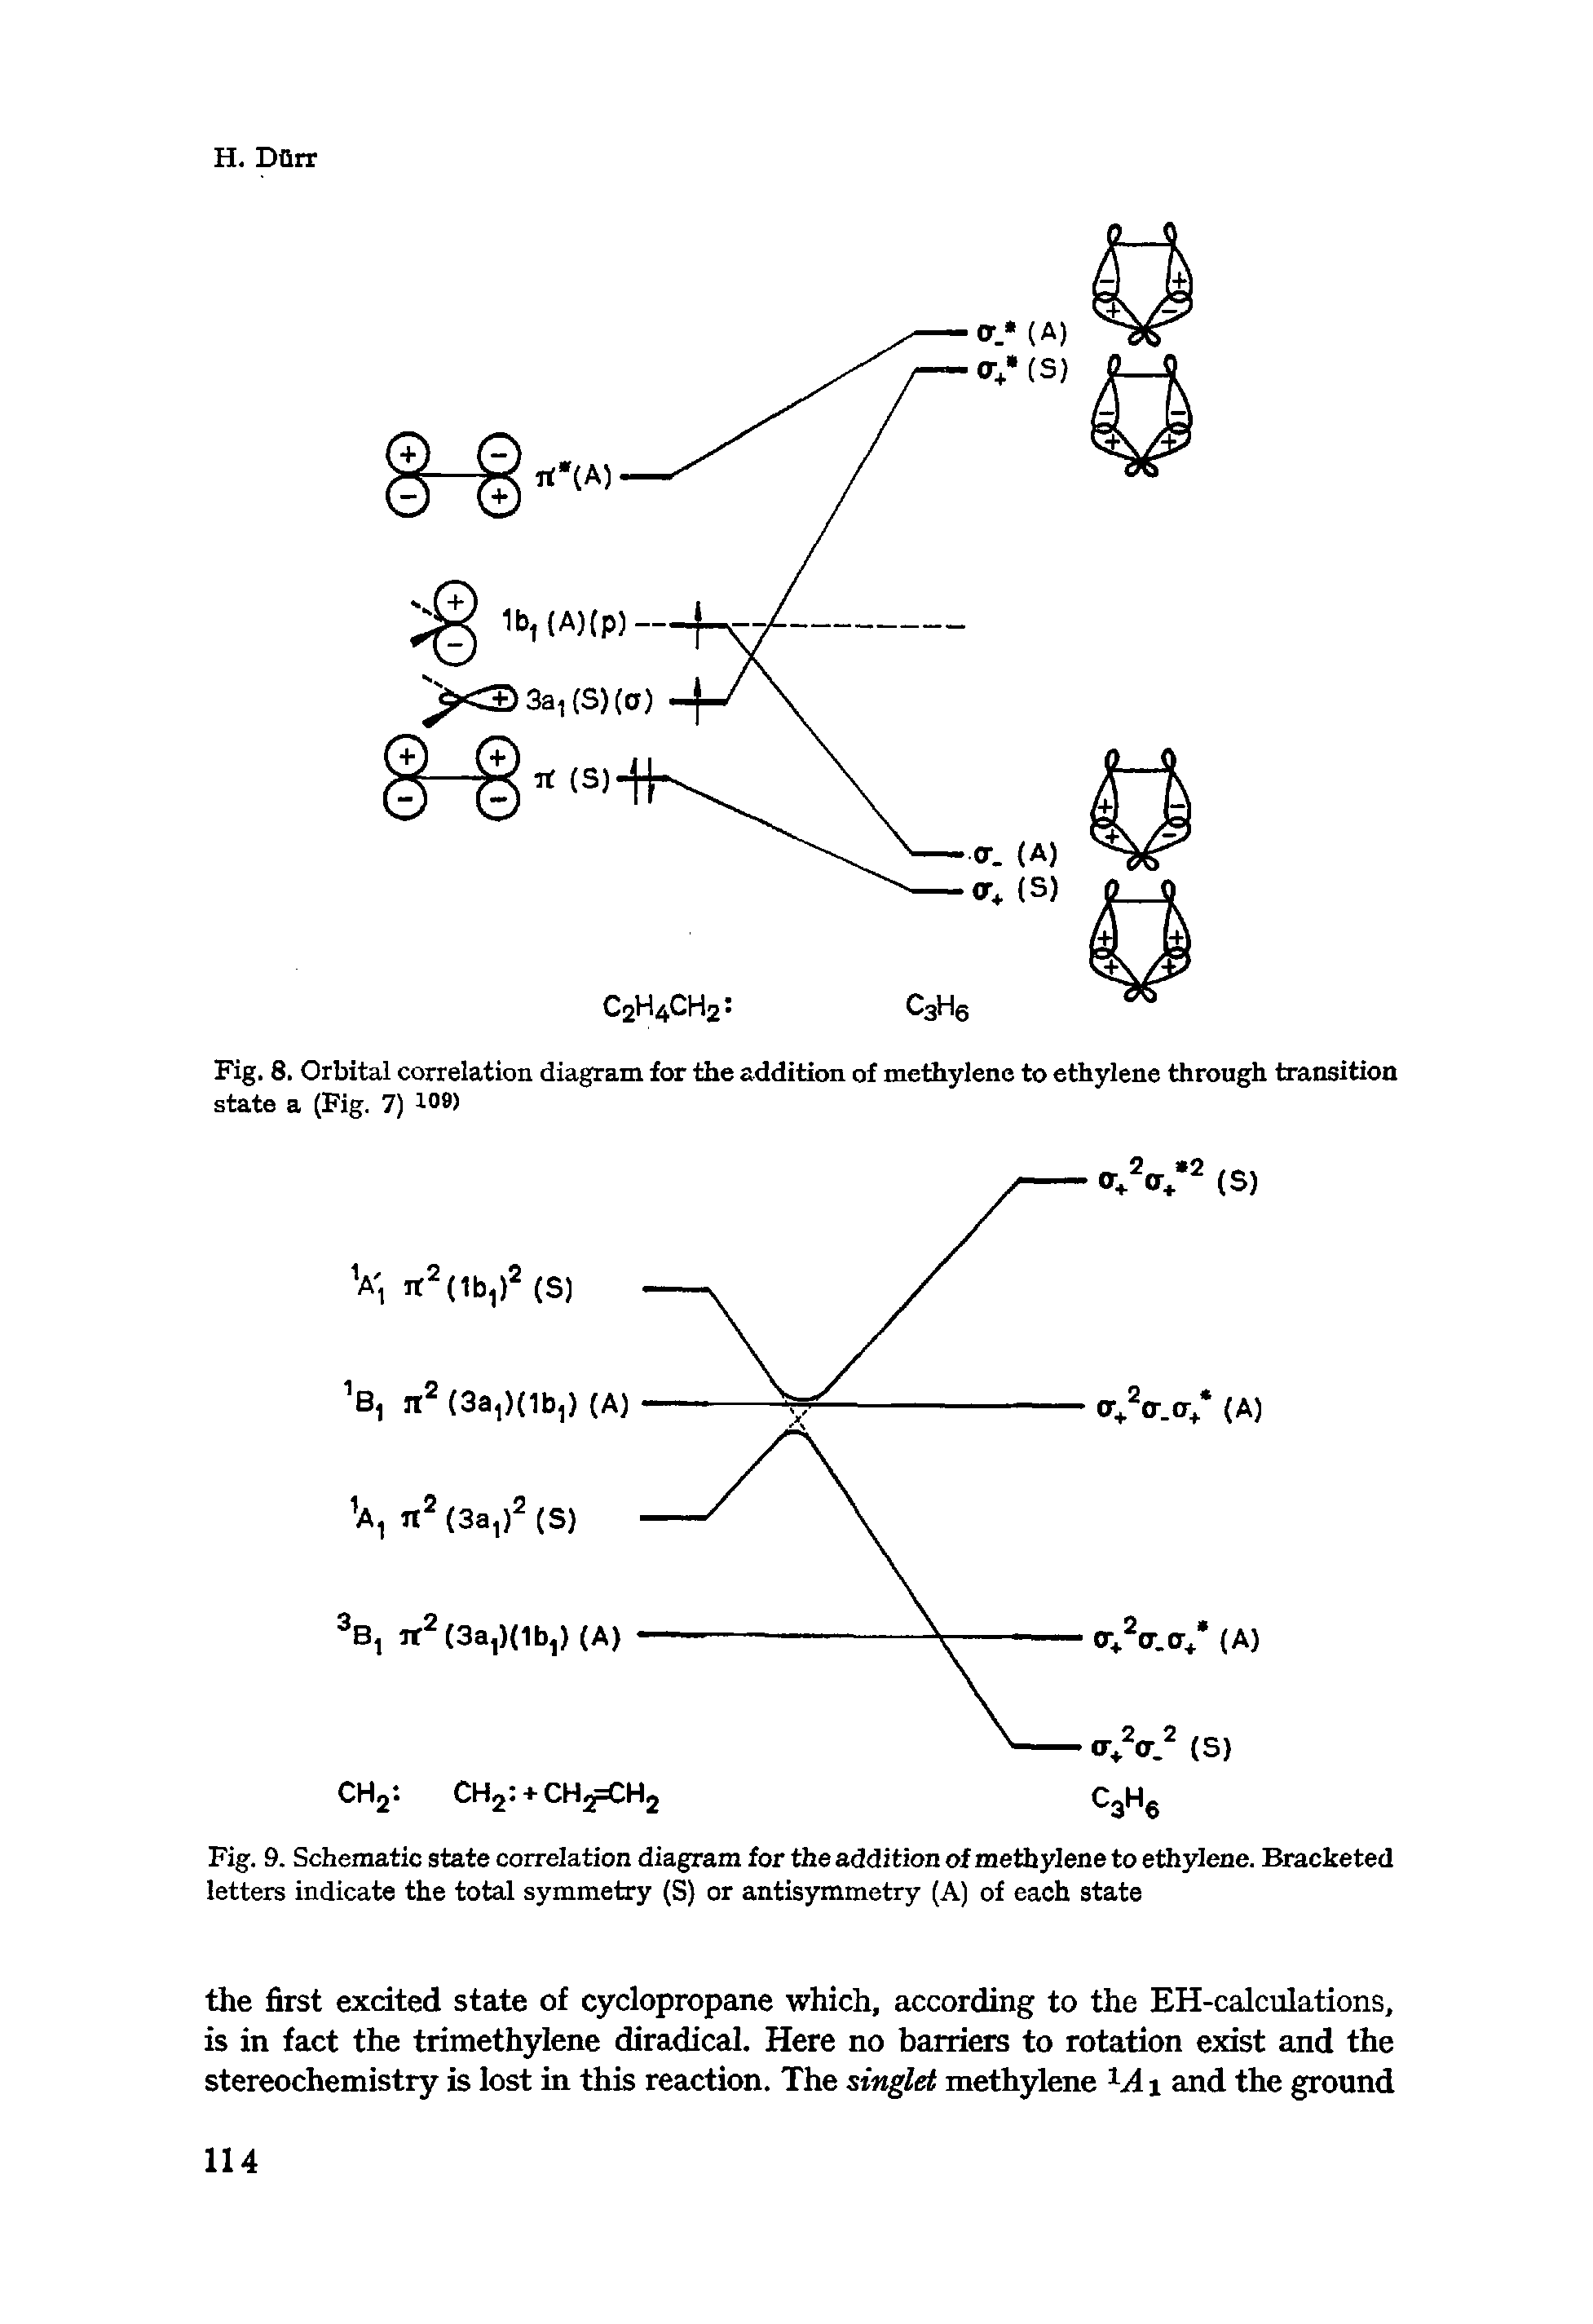 Fig. 9. Schematic state correlation diagram for the addition of methylene to ethylene. Bracketed letters indicate the total symmetry (S) or antisymmetry (A) of each state...